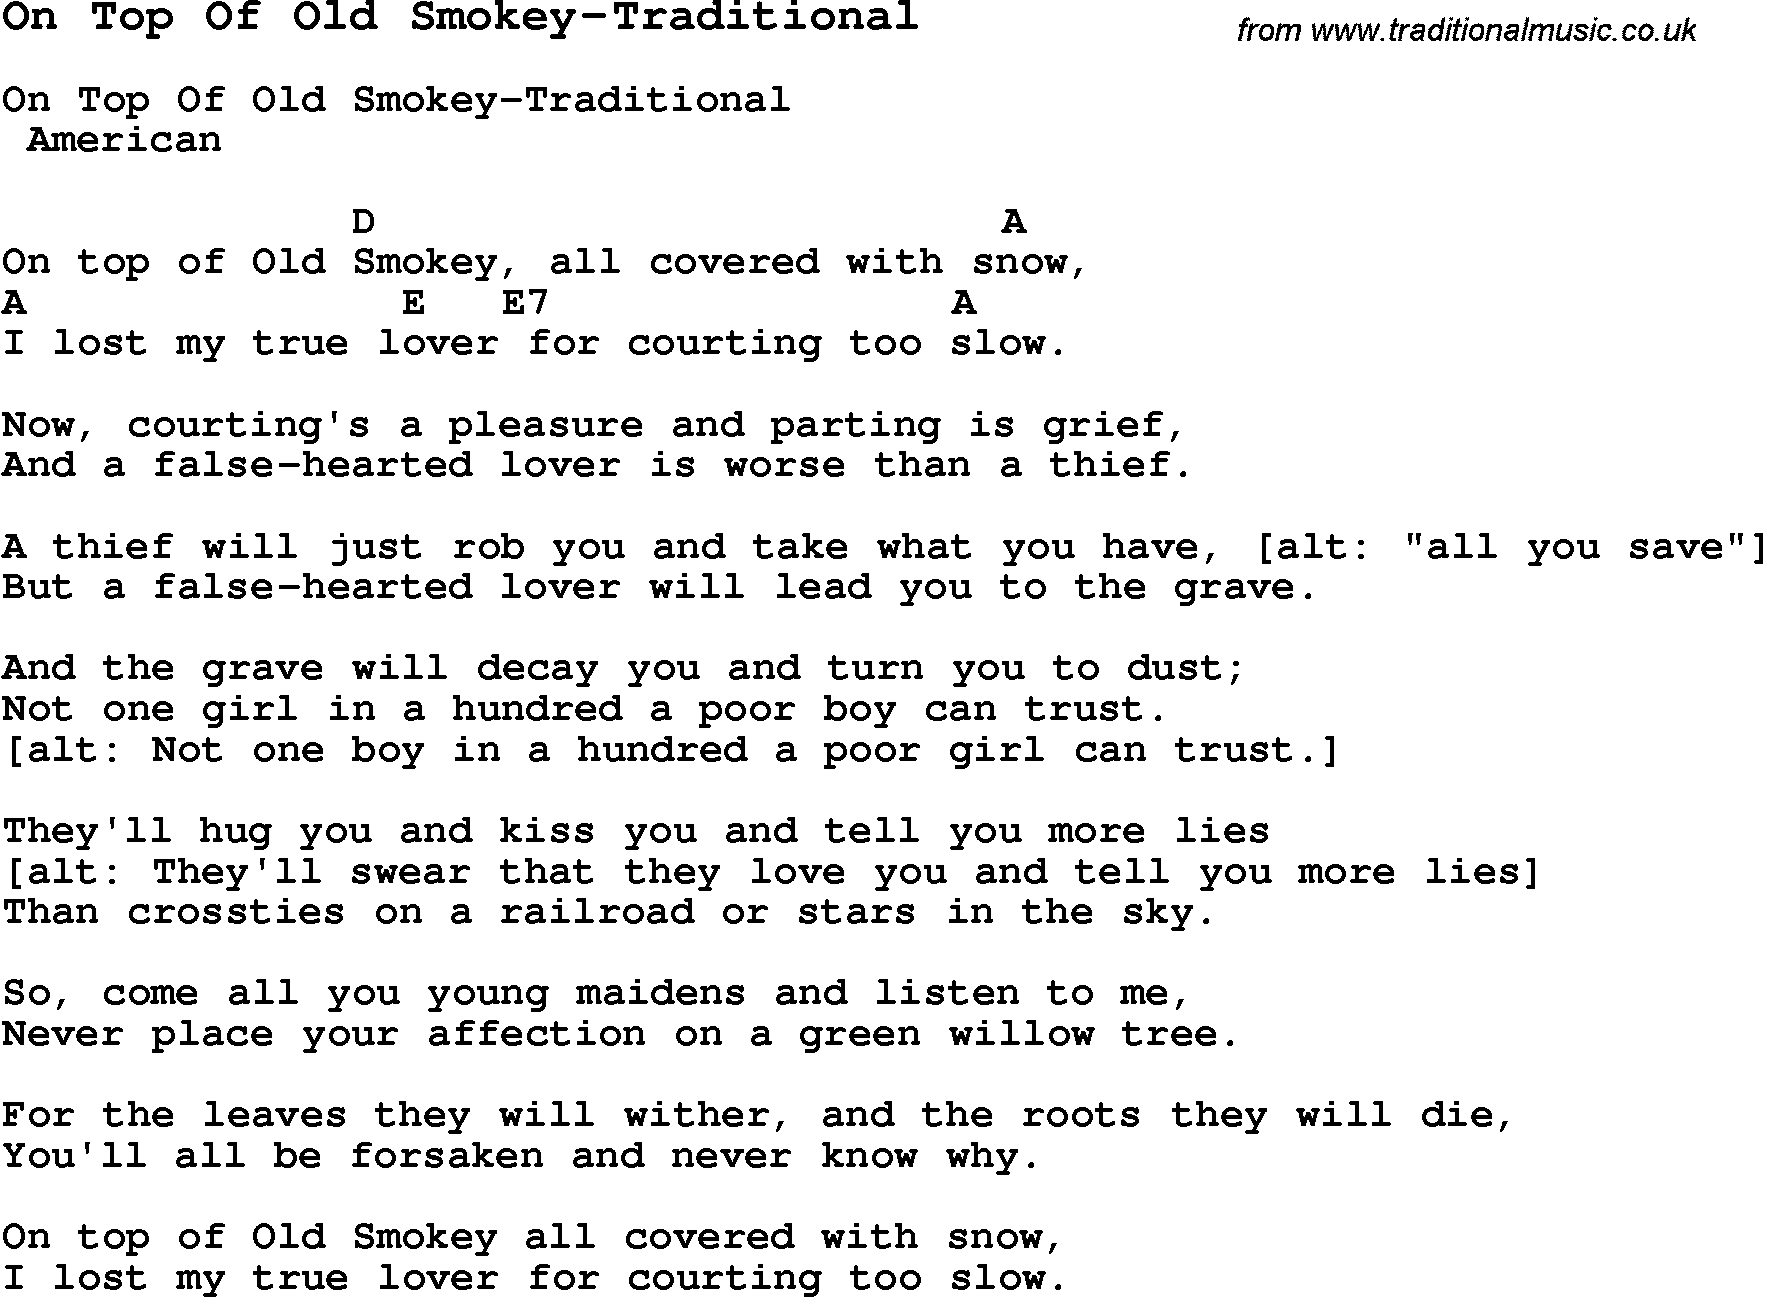 Summer-Camp Song, On Top Of Old Smokey-Traditional, with lyrics and chords for Ukulele, Guitar Banjo etc.